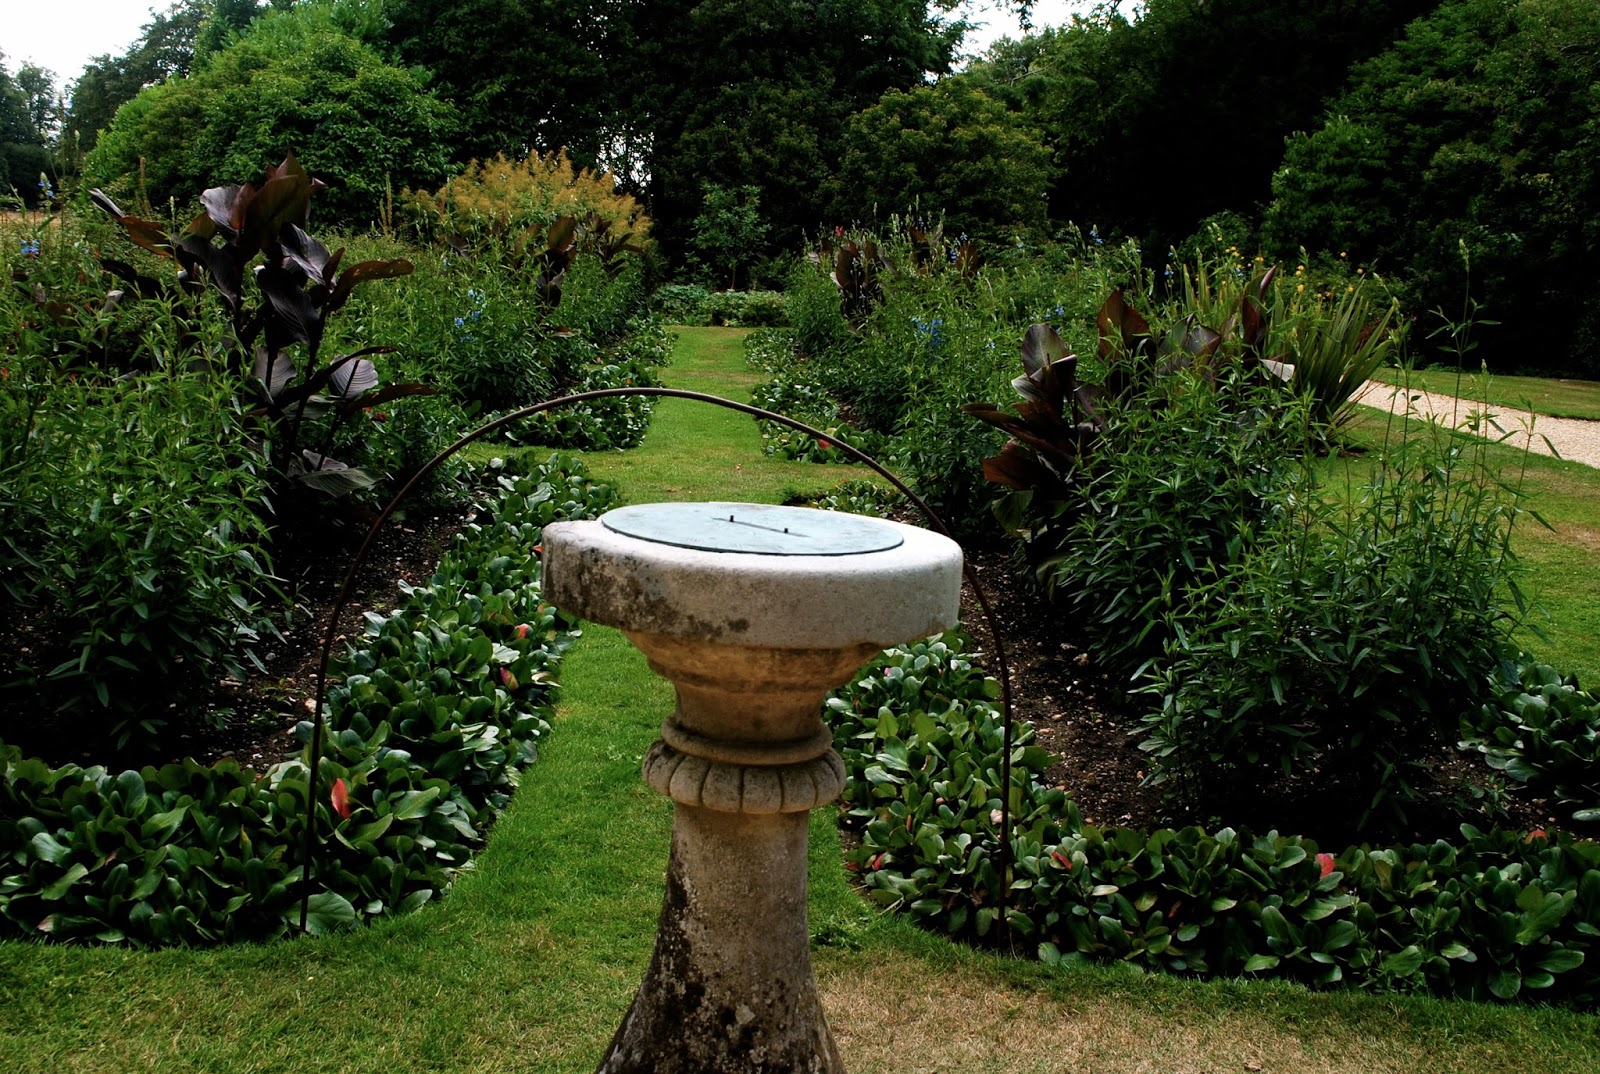 Charles Darwin's Sundial at the Downe House Garden